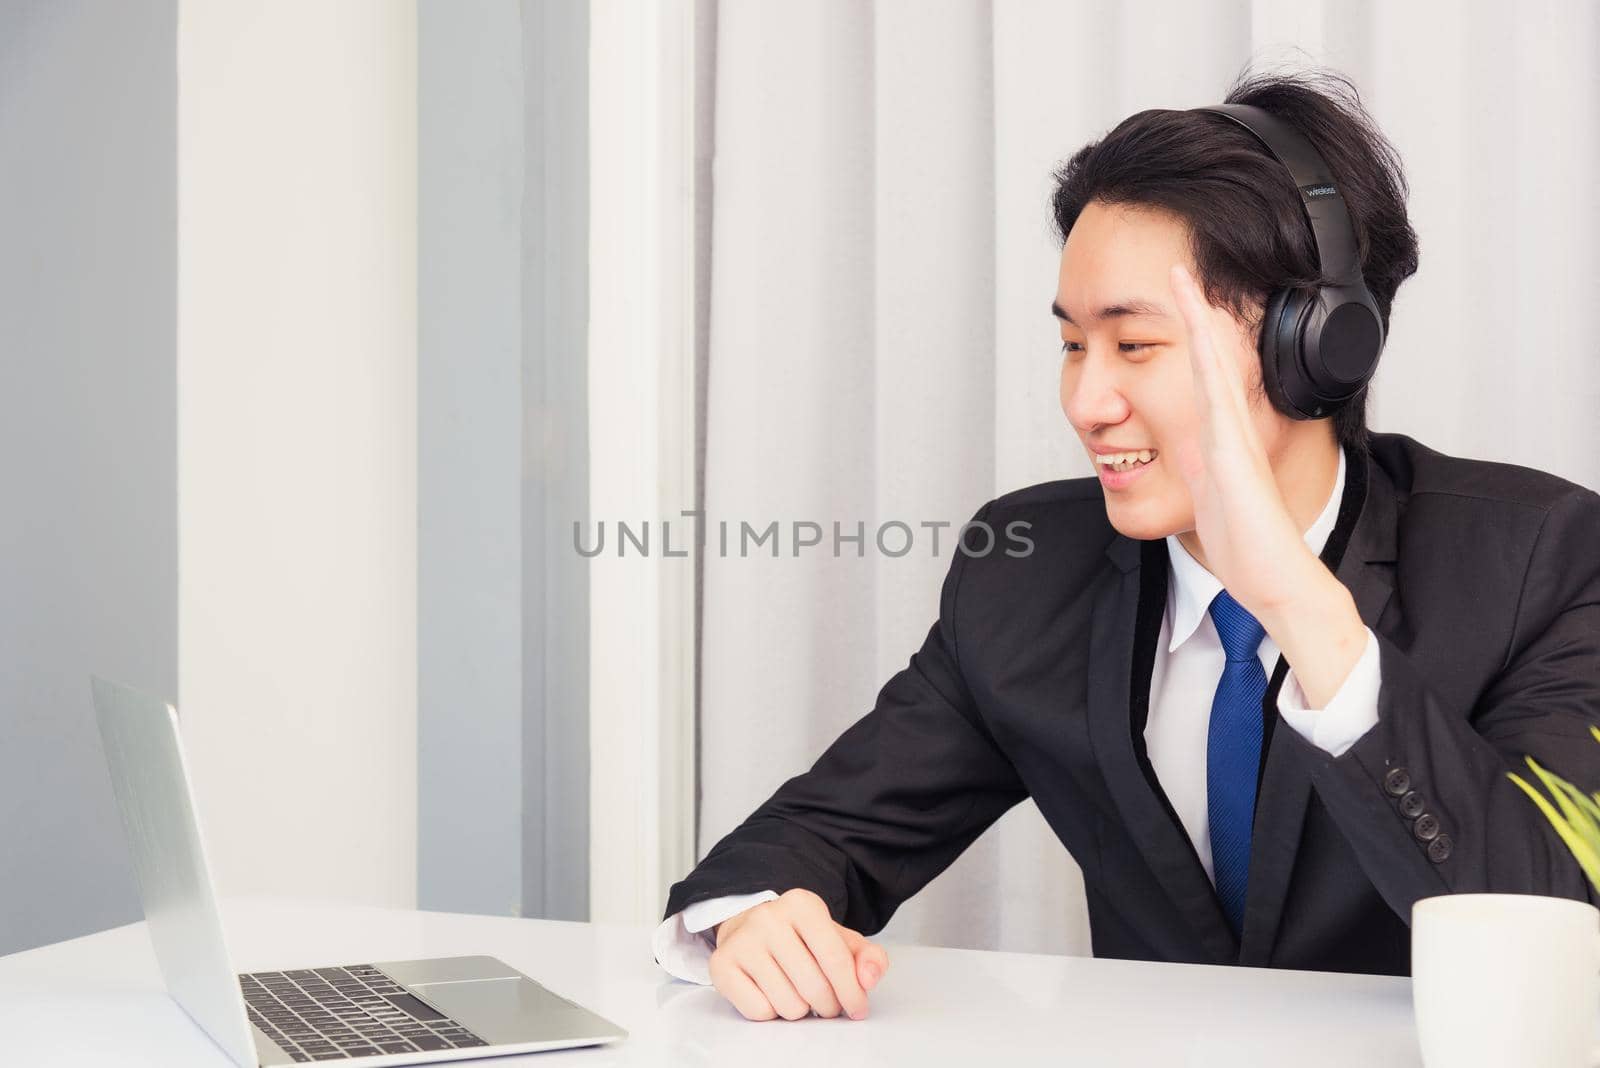 Work from home, Asian young businessman smile wearing headphones and suit video conference call or facetime on desk and raise your hand to say hello greet colleague at home office